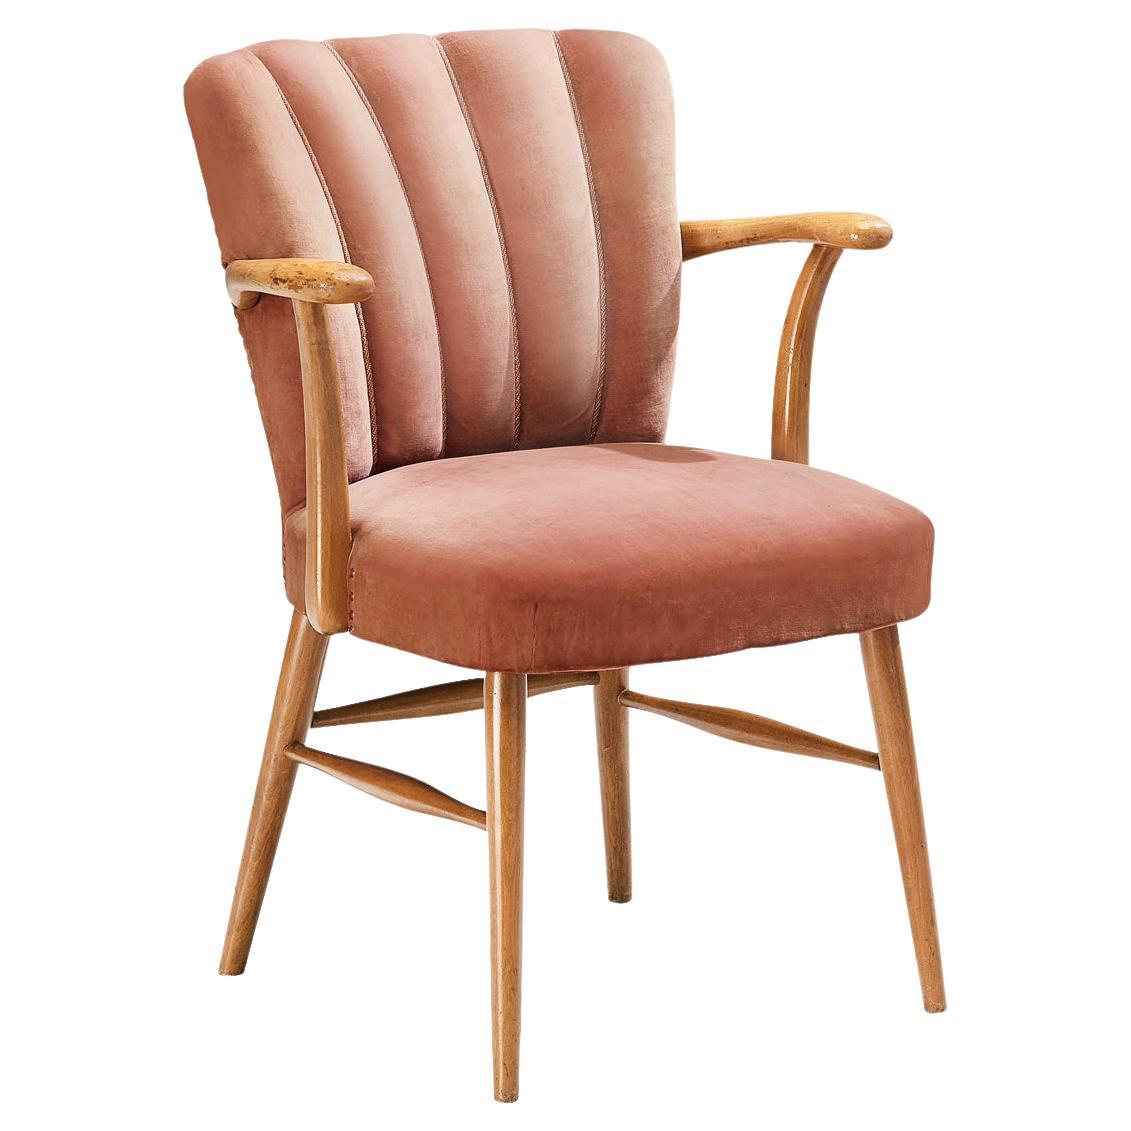 European Armchair in Soft Pink Velvet Upholstery and Wood 